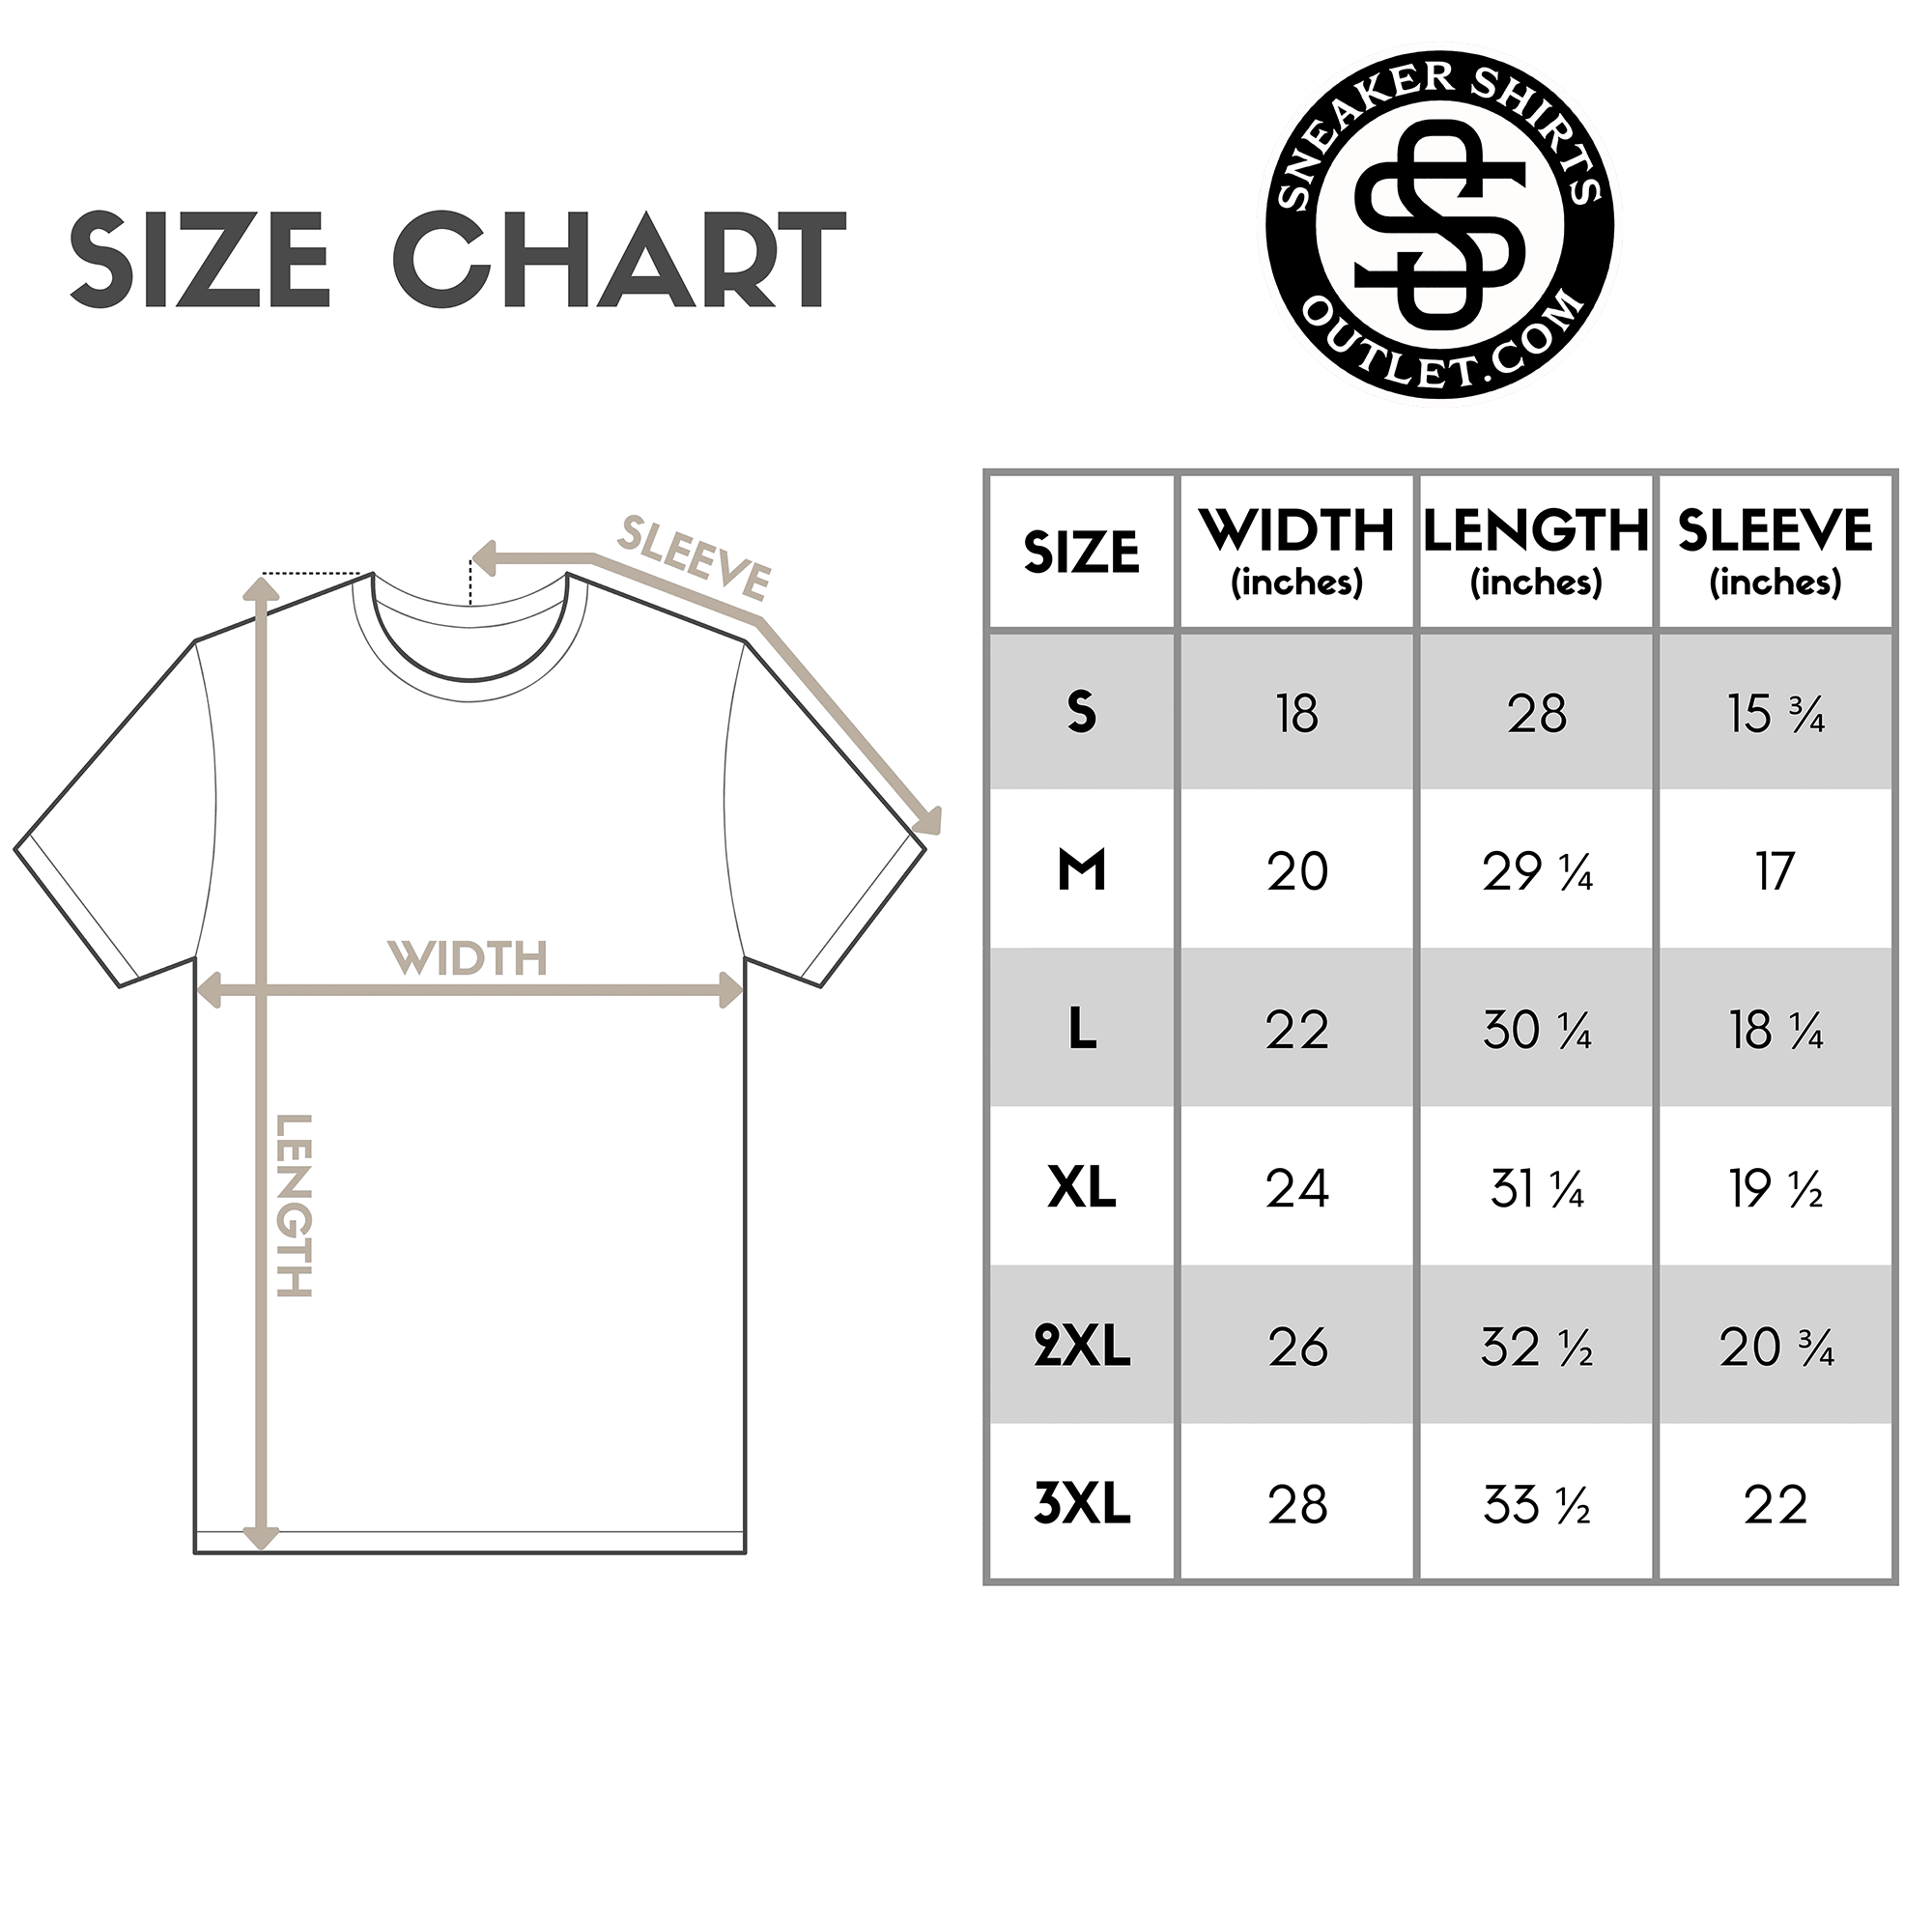 23 Shirt by Dope Star Clothing® size chart photo